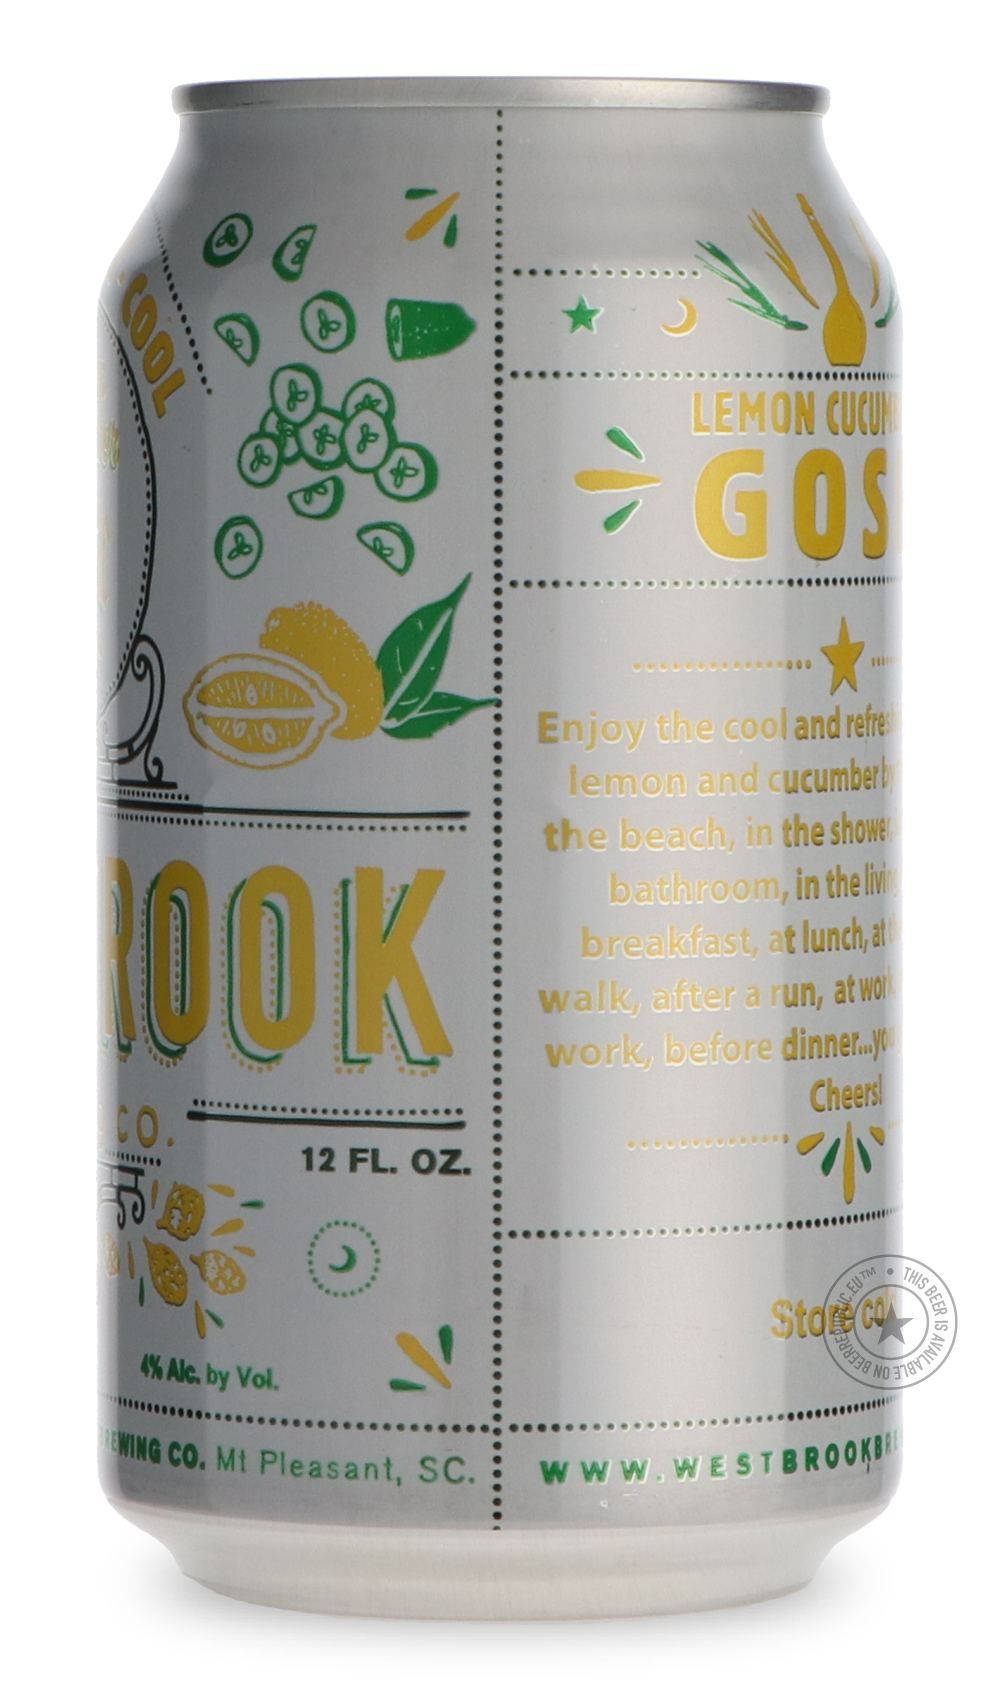 -Westbrook- Lemon Cucumber Gose-Sour / Wild & Fruity- Only @ Beer Republic - The best online beer store for American & Canadian craft beer - Buy beer online from the USA and Canada - Bier online kopen - Amerikaans bier kopen - Craft beer store - Craft beer kopen - Amerikanisch bier kaufen - Bier online kaufen - Acheter biere online - IPA - Stout - Porter - New England IPA - Hazy IPA - Imperial Stout - Barrel Aged - Barrel Aged Imperial Stout - Brown - Dark beer - Blond - Blonde - Pilsner - Lager - Wheat - W